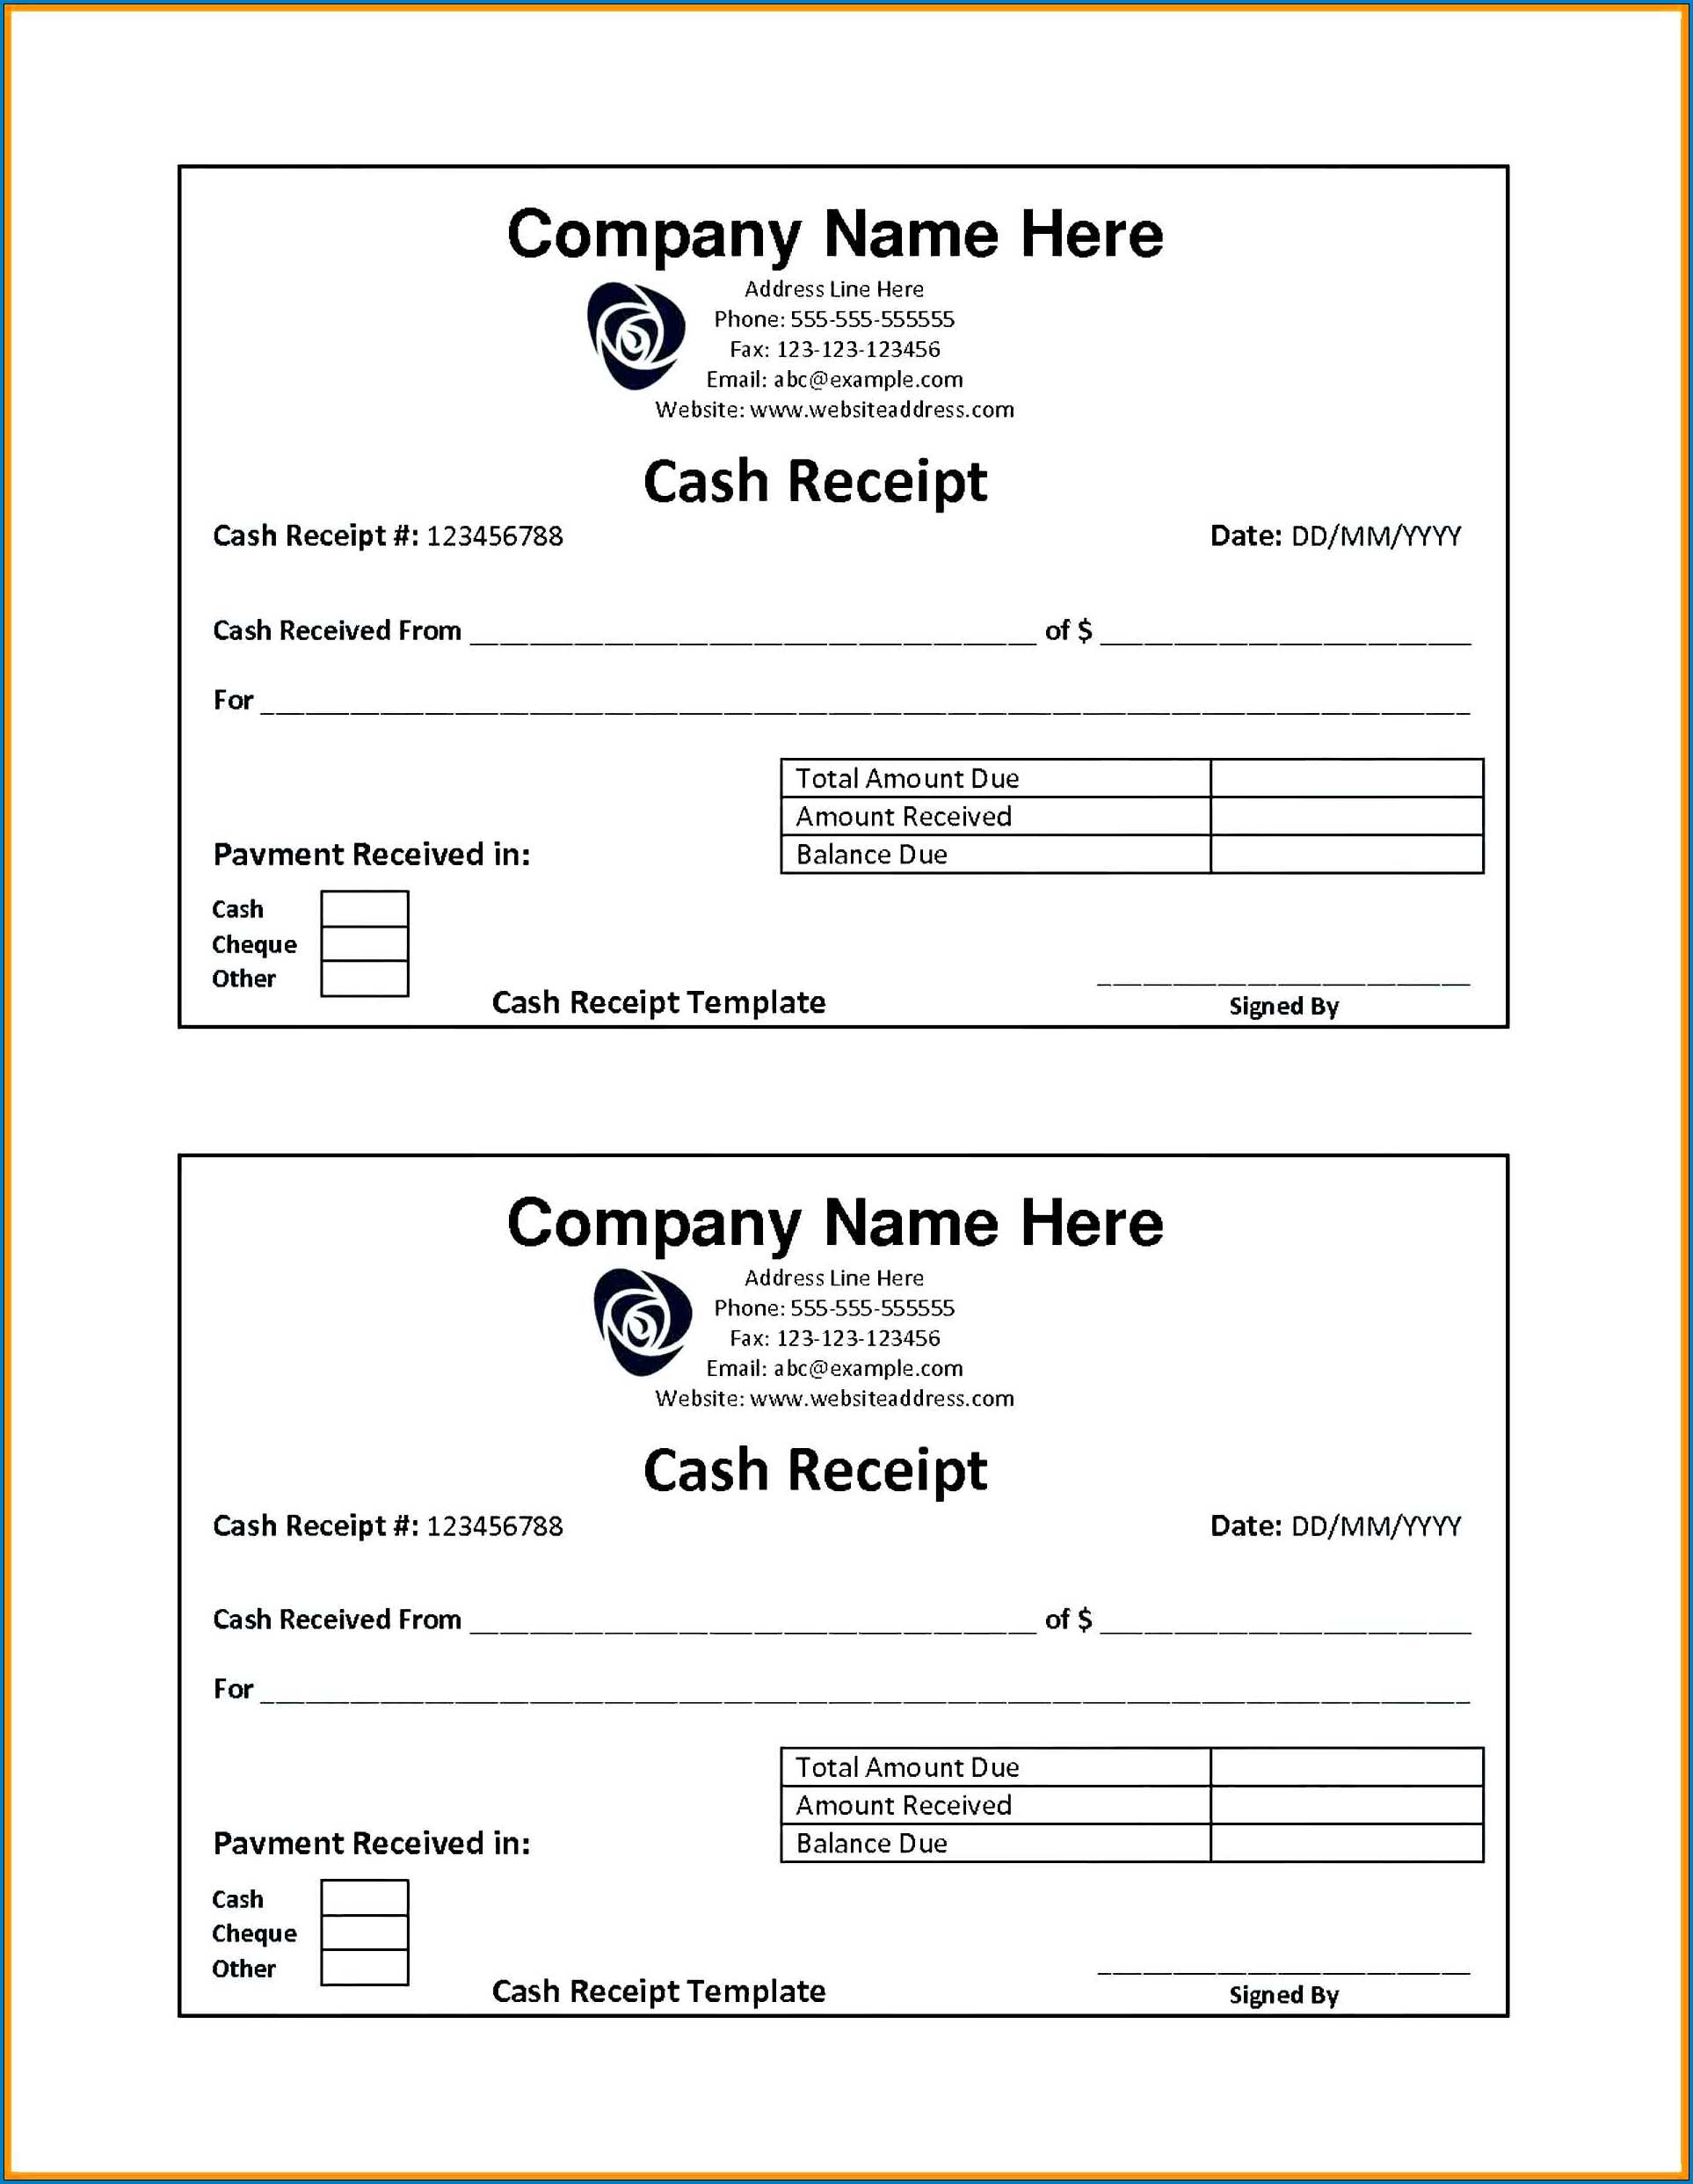 Example of Cash Receipt Template Word